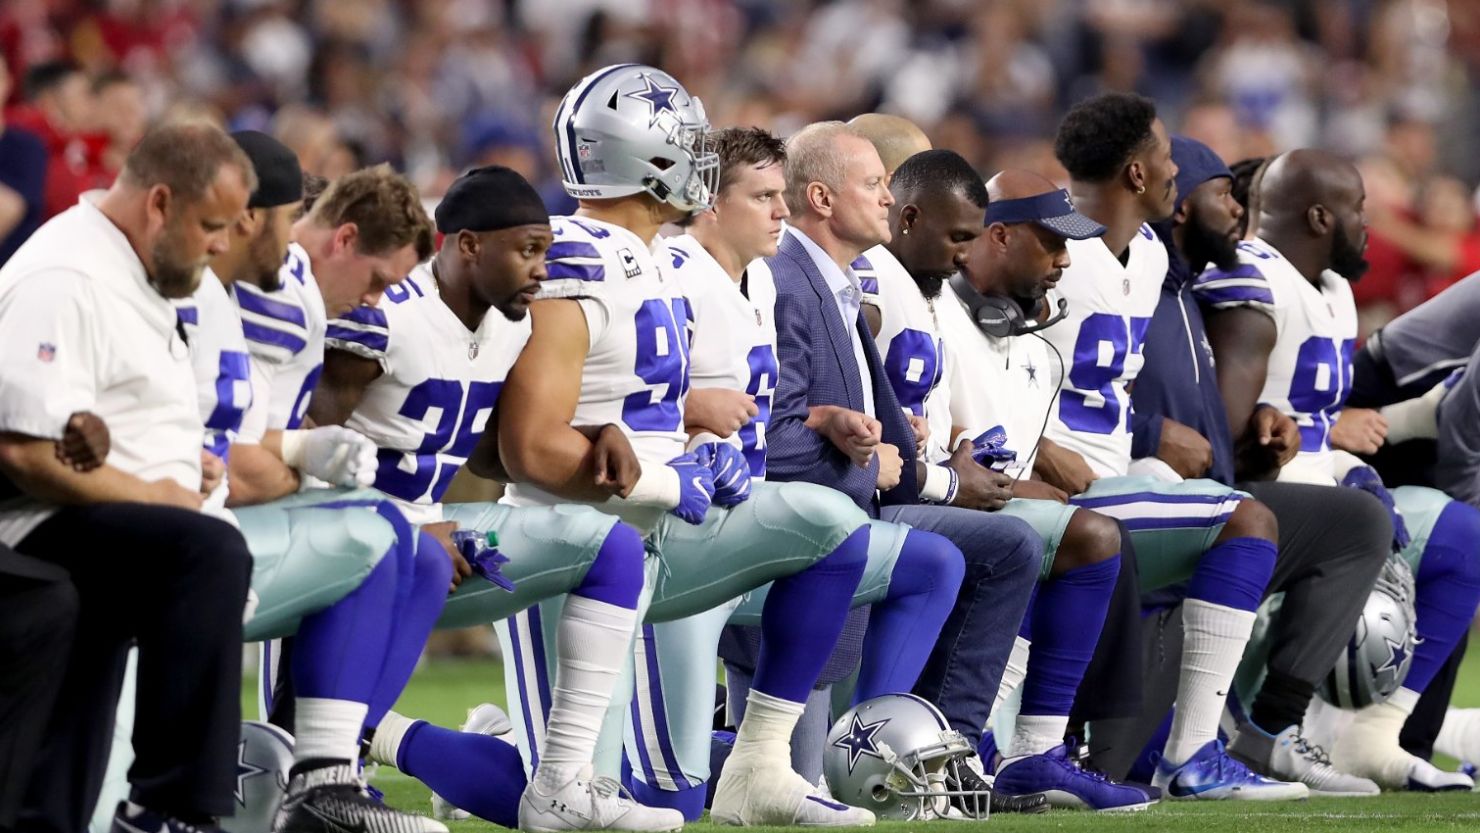 Members of the Dallas Cowboys link arms and kneel during the National Anthem before the start of the NFL game against the Arizona Cardinals on September 25